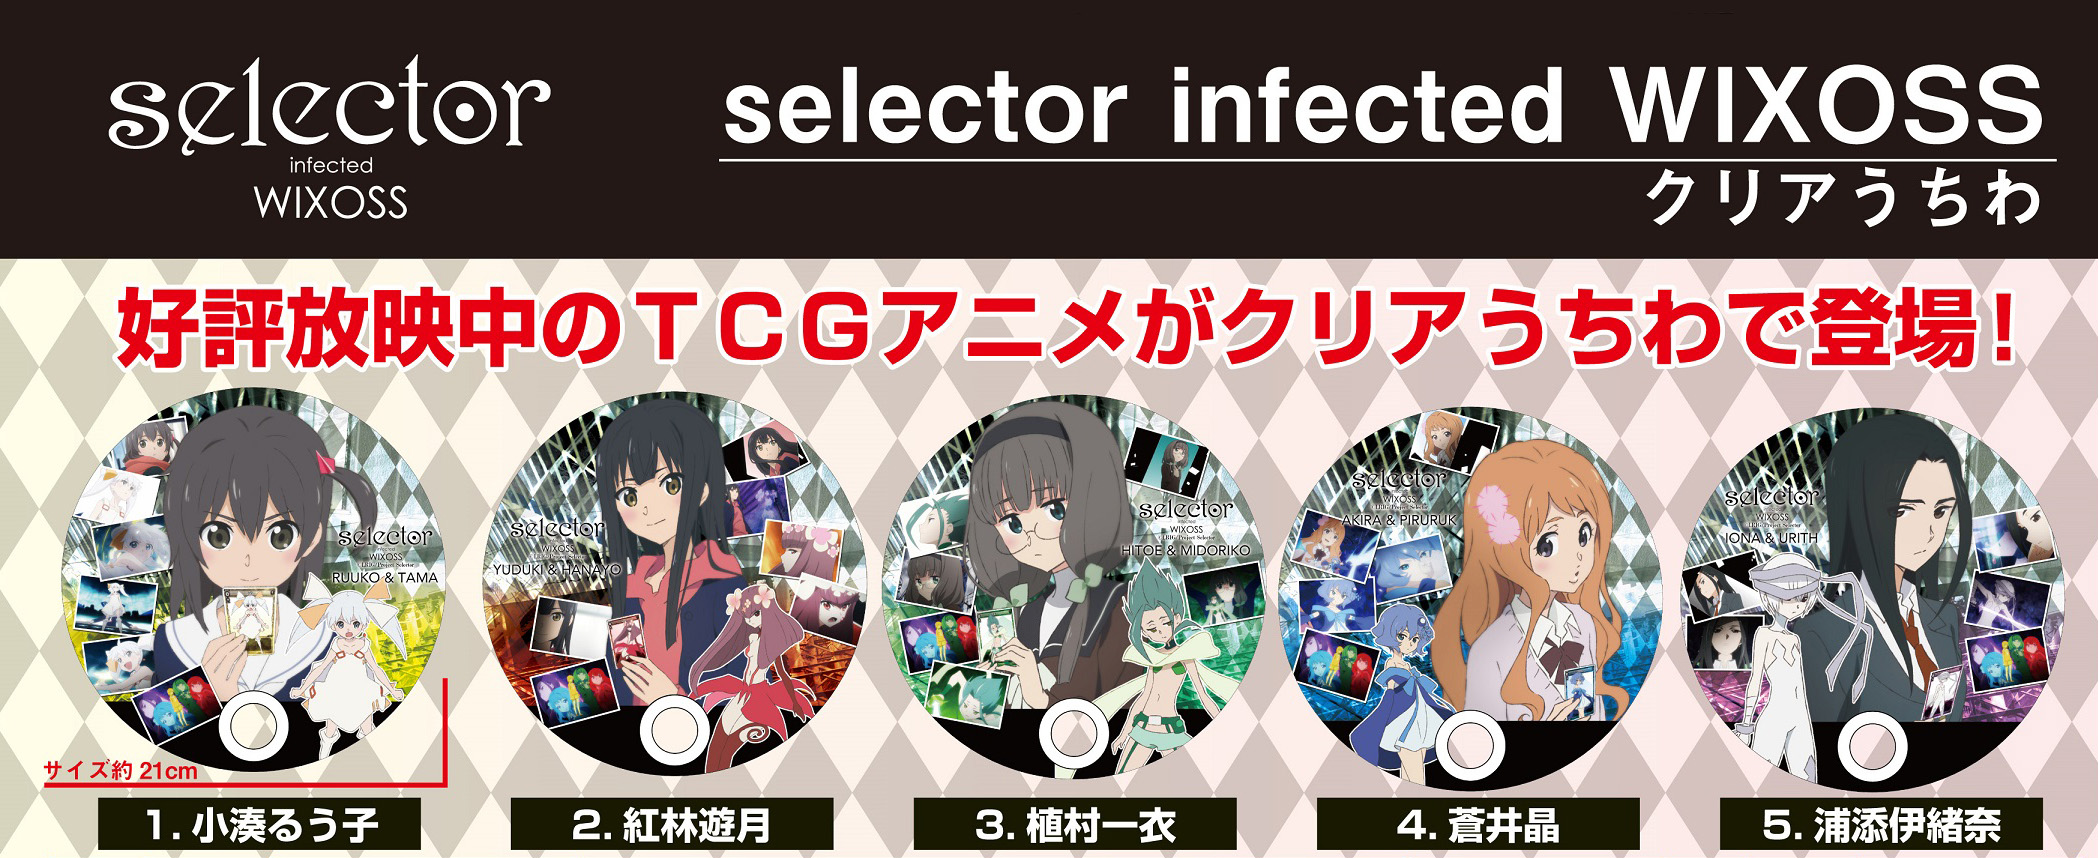 Selector Infected Wixoss Clear Uchiwa Milestone Inc Group Set Product Detail Information